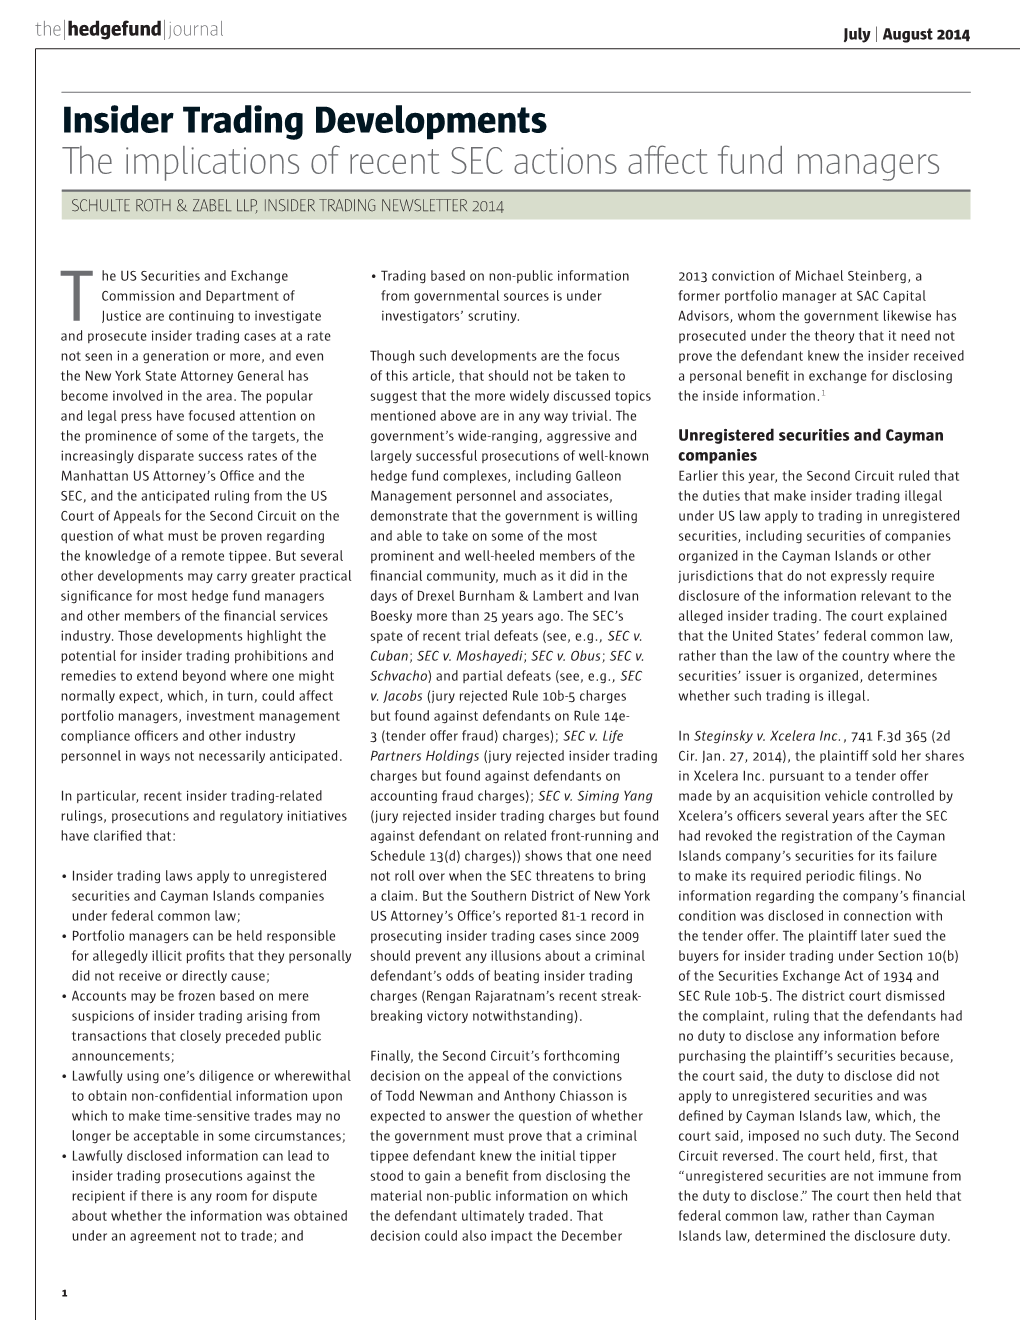 The Implications of Recent SEC Actions Affect Fund Managers SCHULTE ROTH & ZABEL LLP, INSIDER TRADING NEWSLETTER 2014